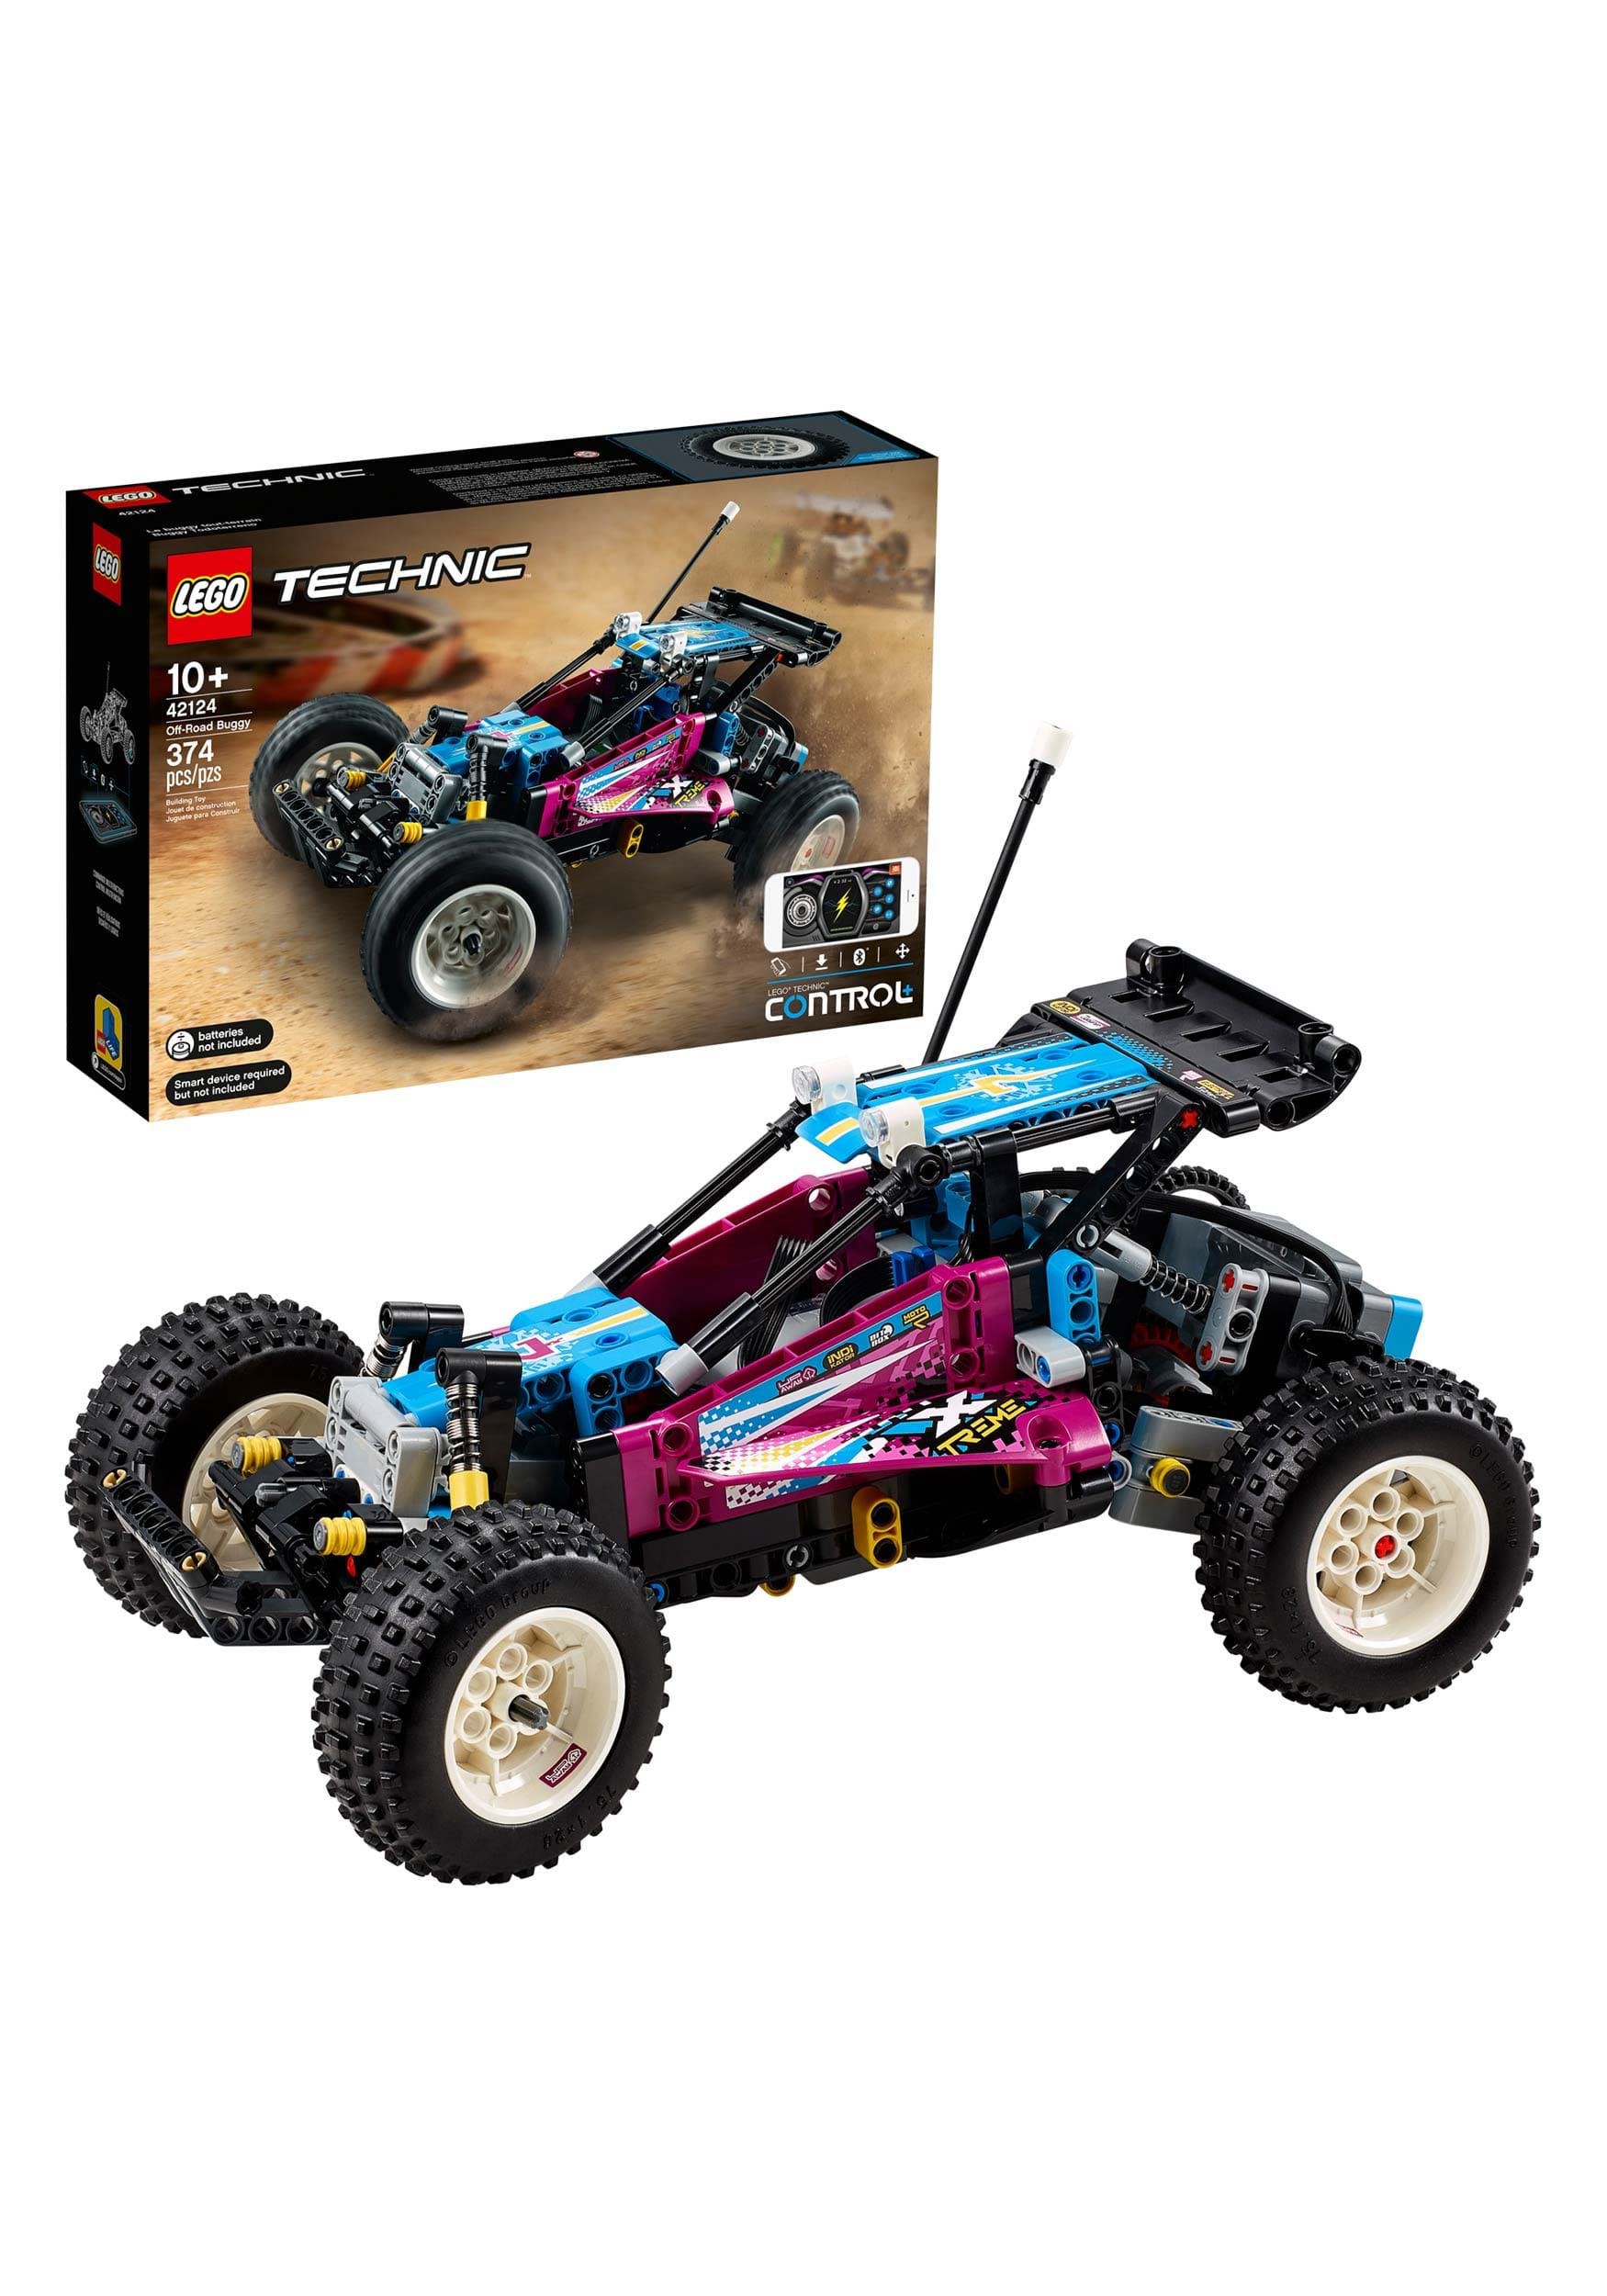 Technic Off-Road Buggy from LEGO